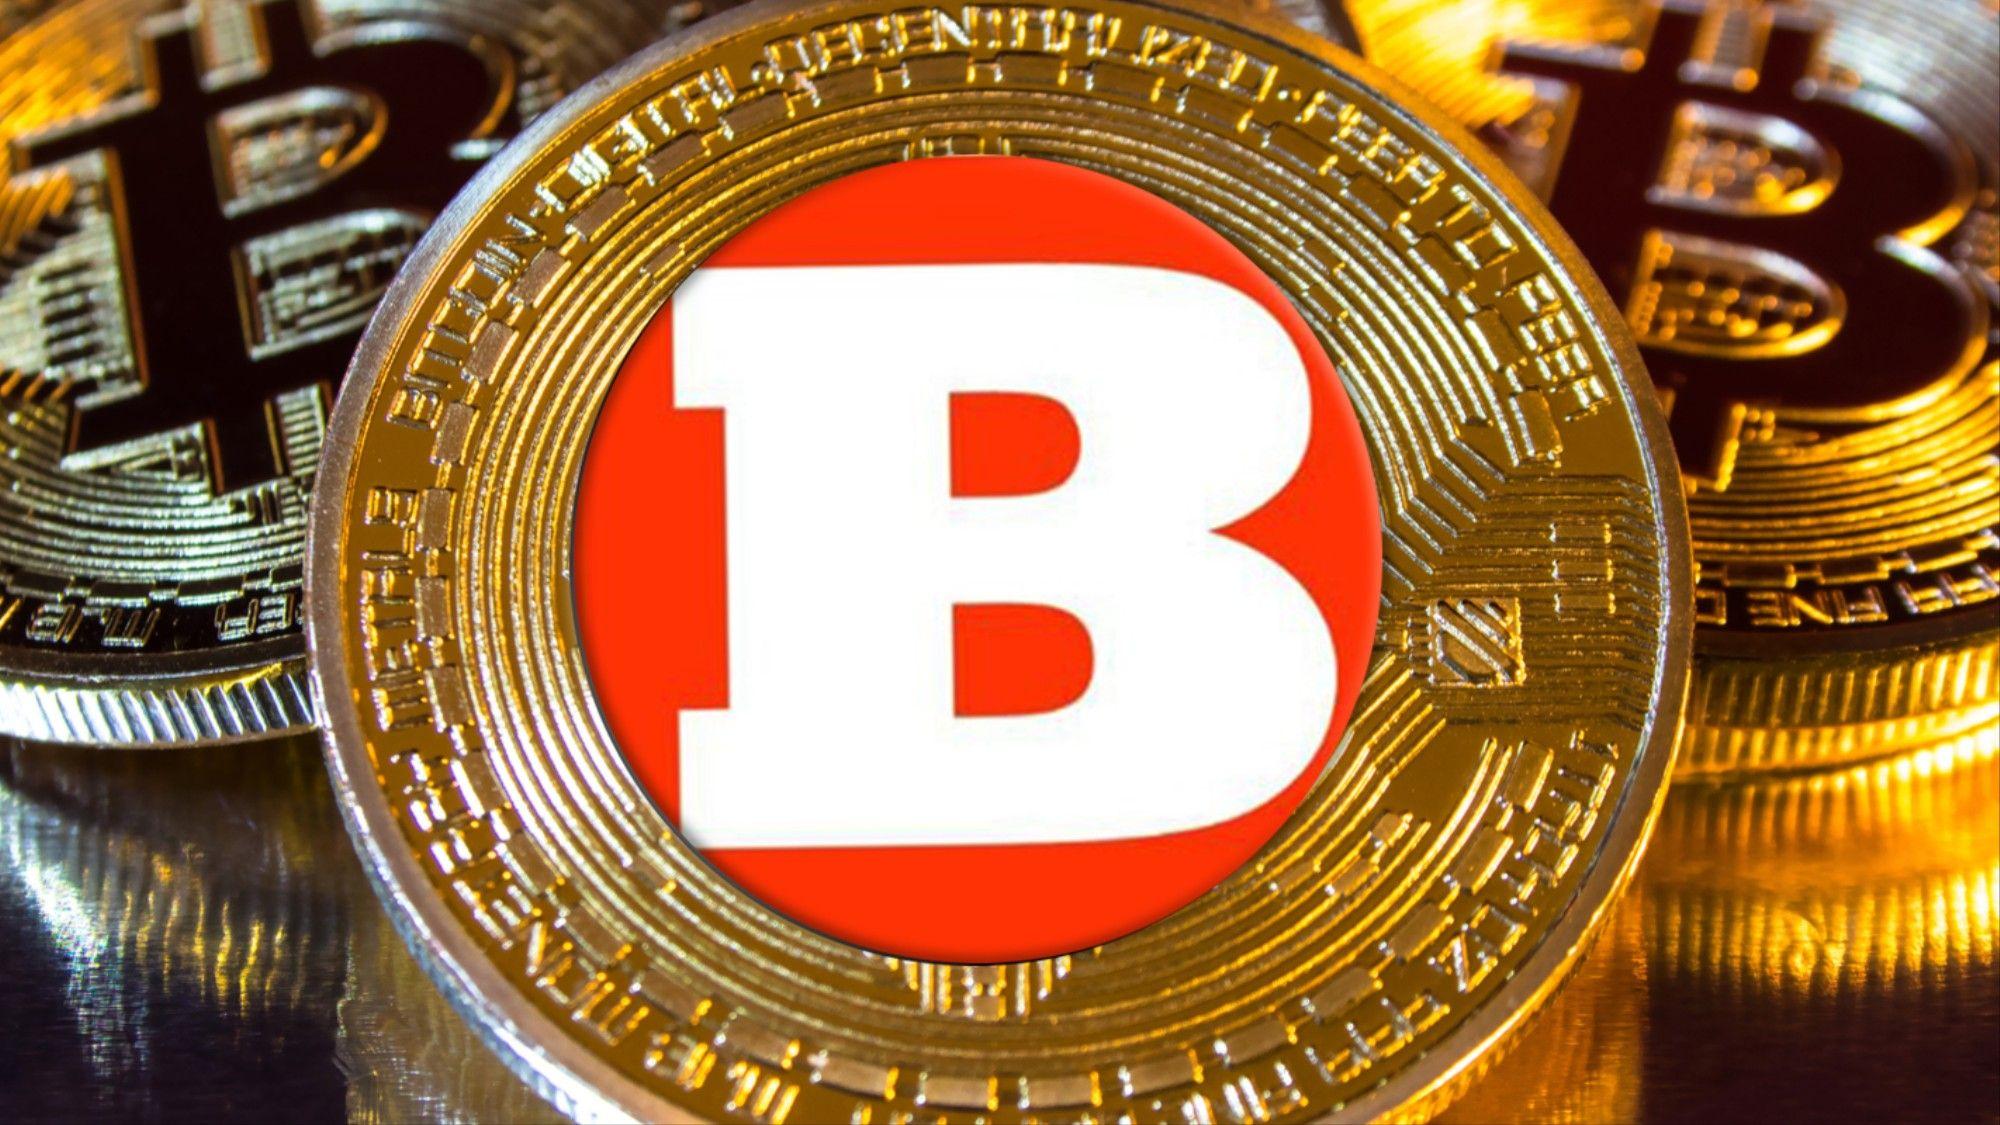 Breitbart Logo - Breitbart Is Hawking Sketchy Cryptocurrencies Through Its Massive ...